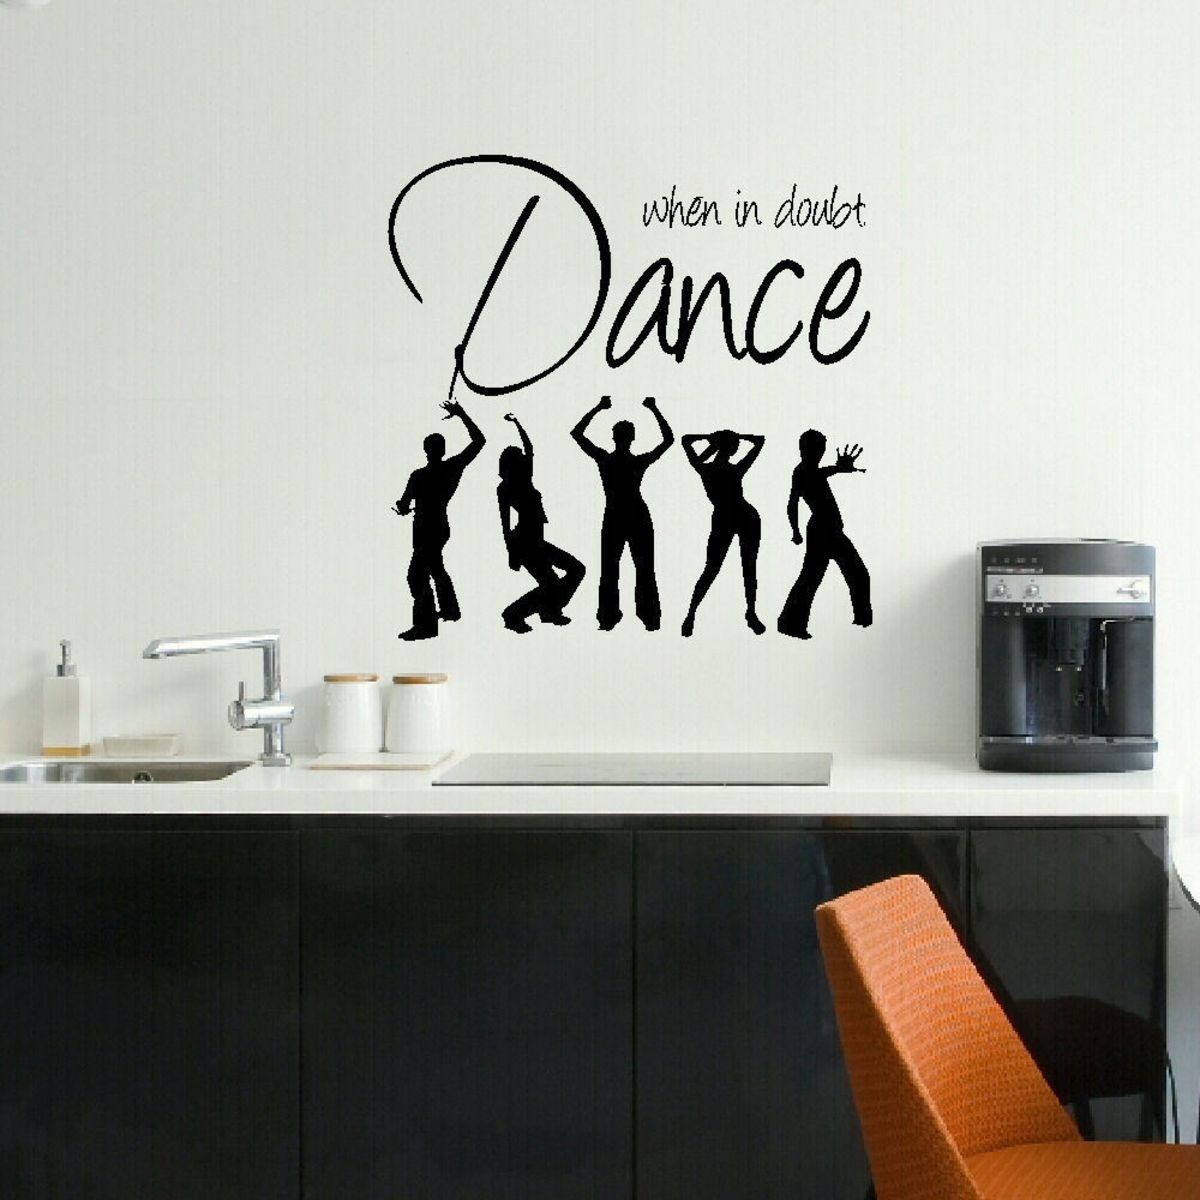 Custom Wall Graphics For The Home &amp; Office.jpg